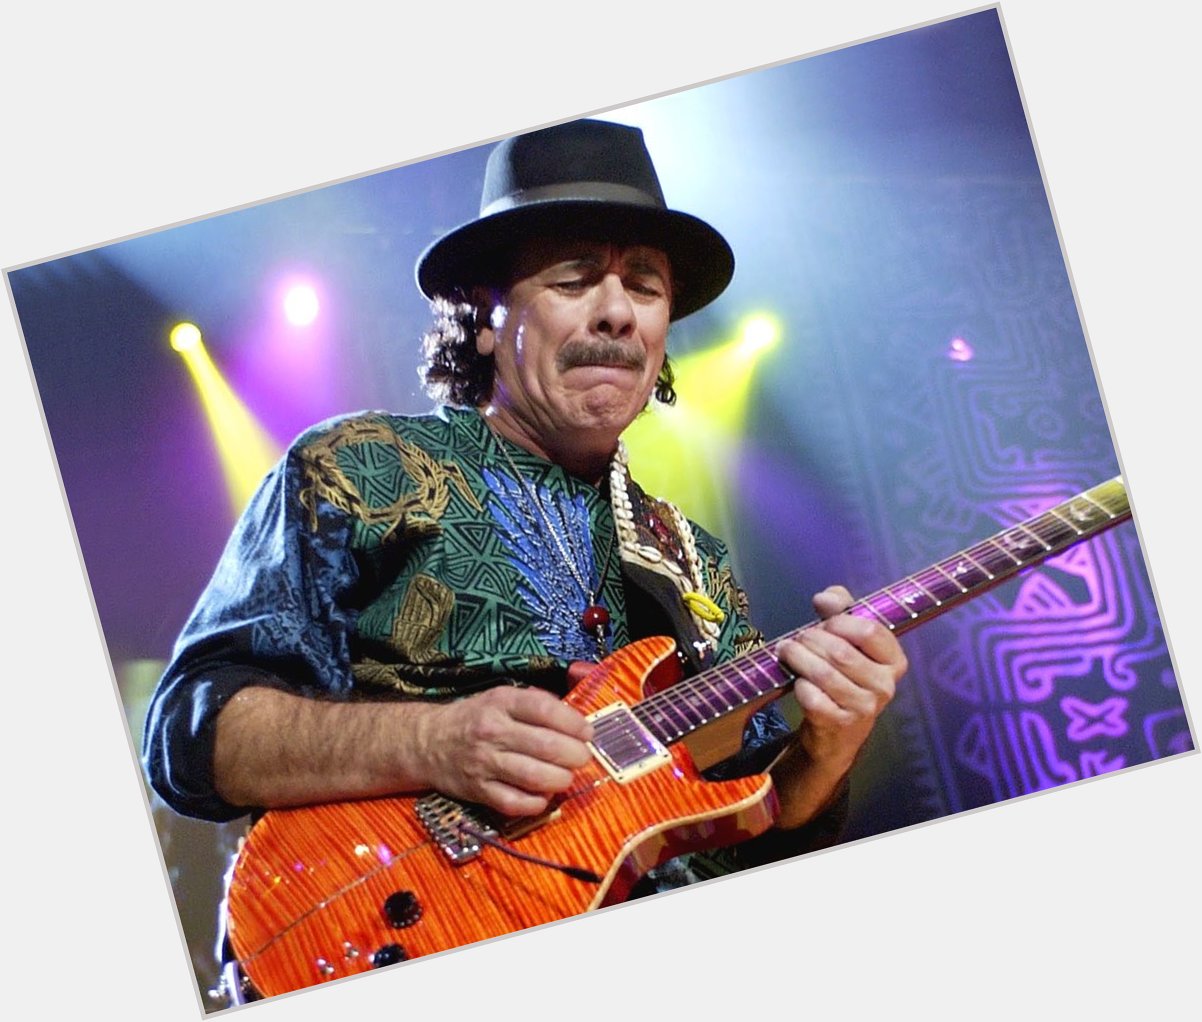 Happy birthday to Carlos Santana, born on 20 July 1947, Mexican and American rock guitarist. 